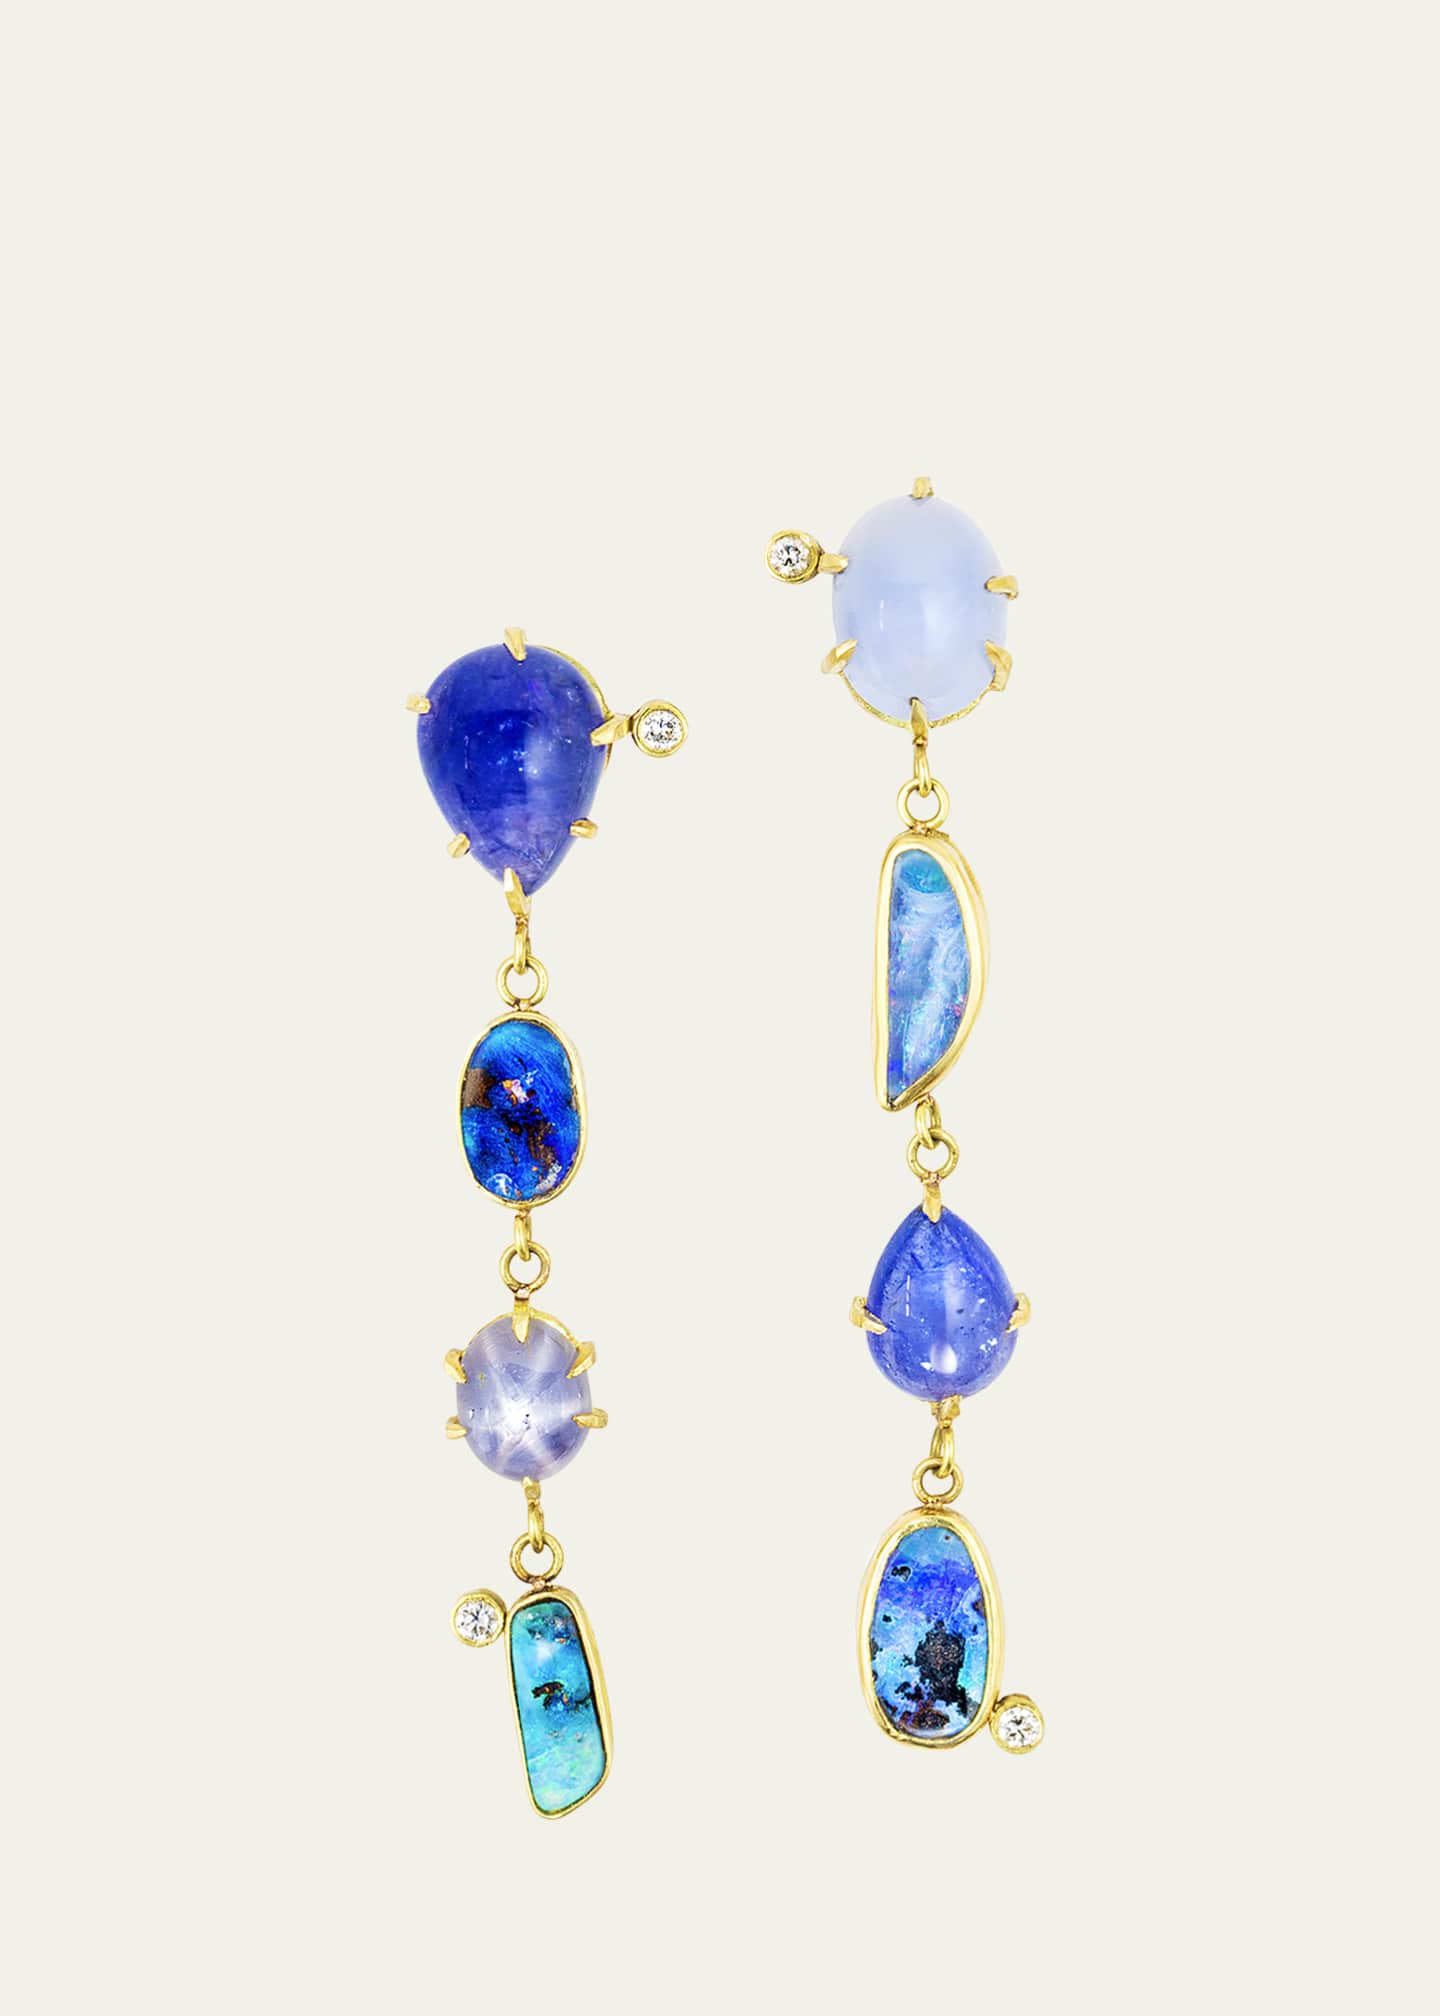 24K 995 Pure Gold Ear Hangings with Blue Color Stones for Women -  1-GER-V00626 in 6.550 Grams